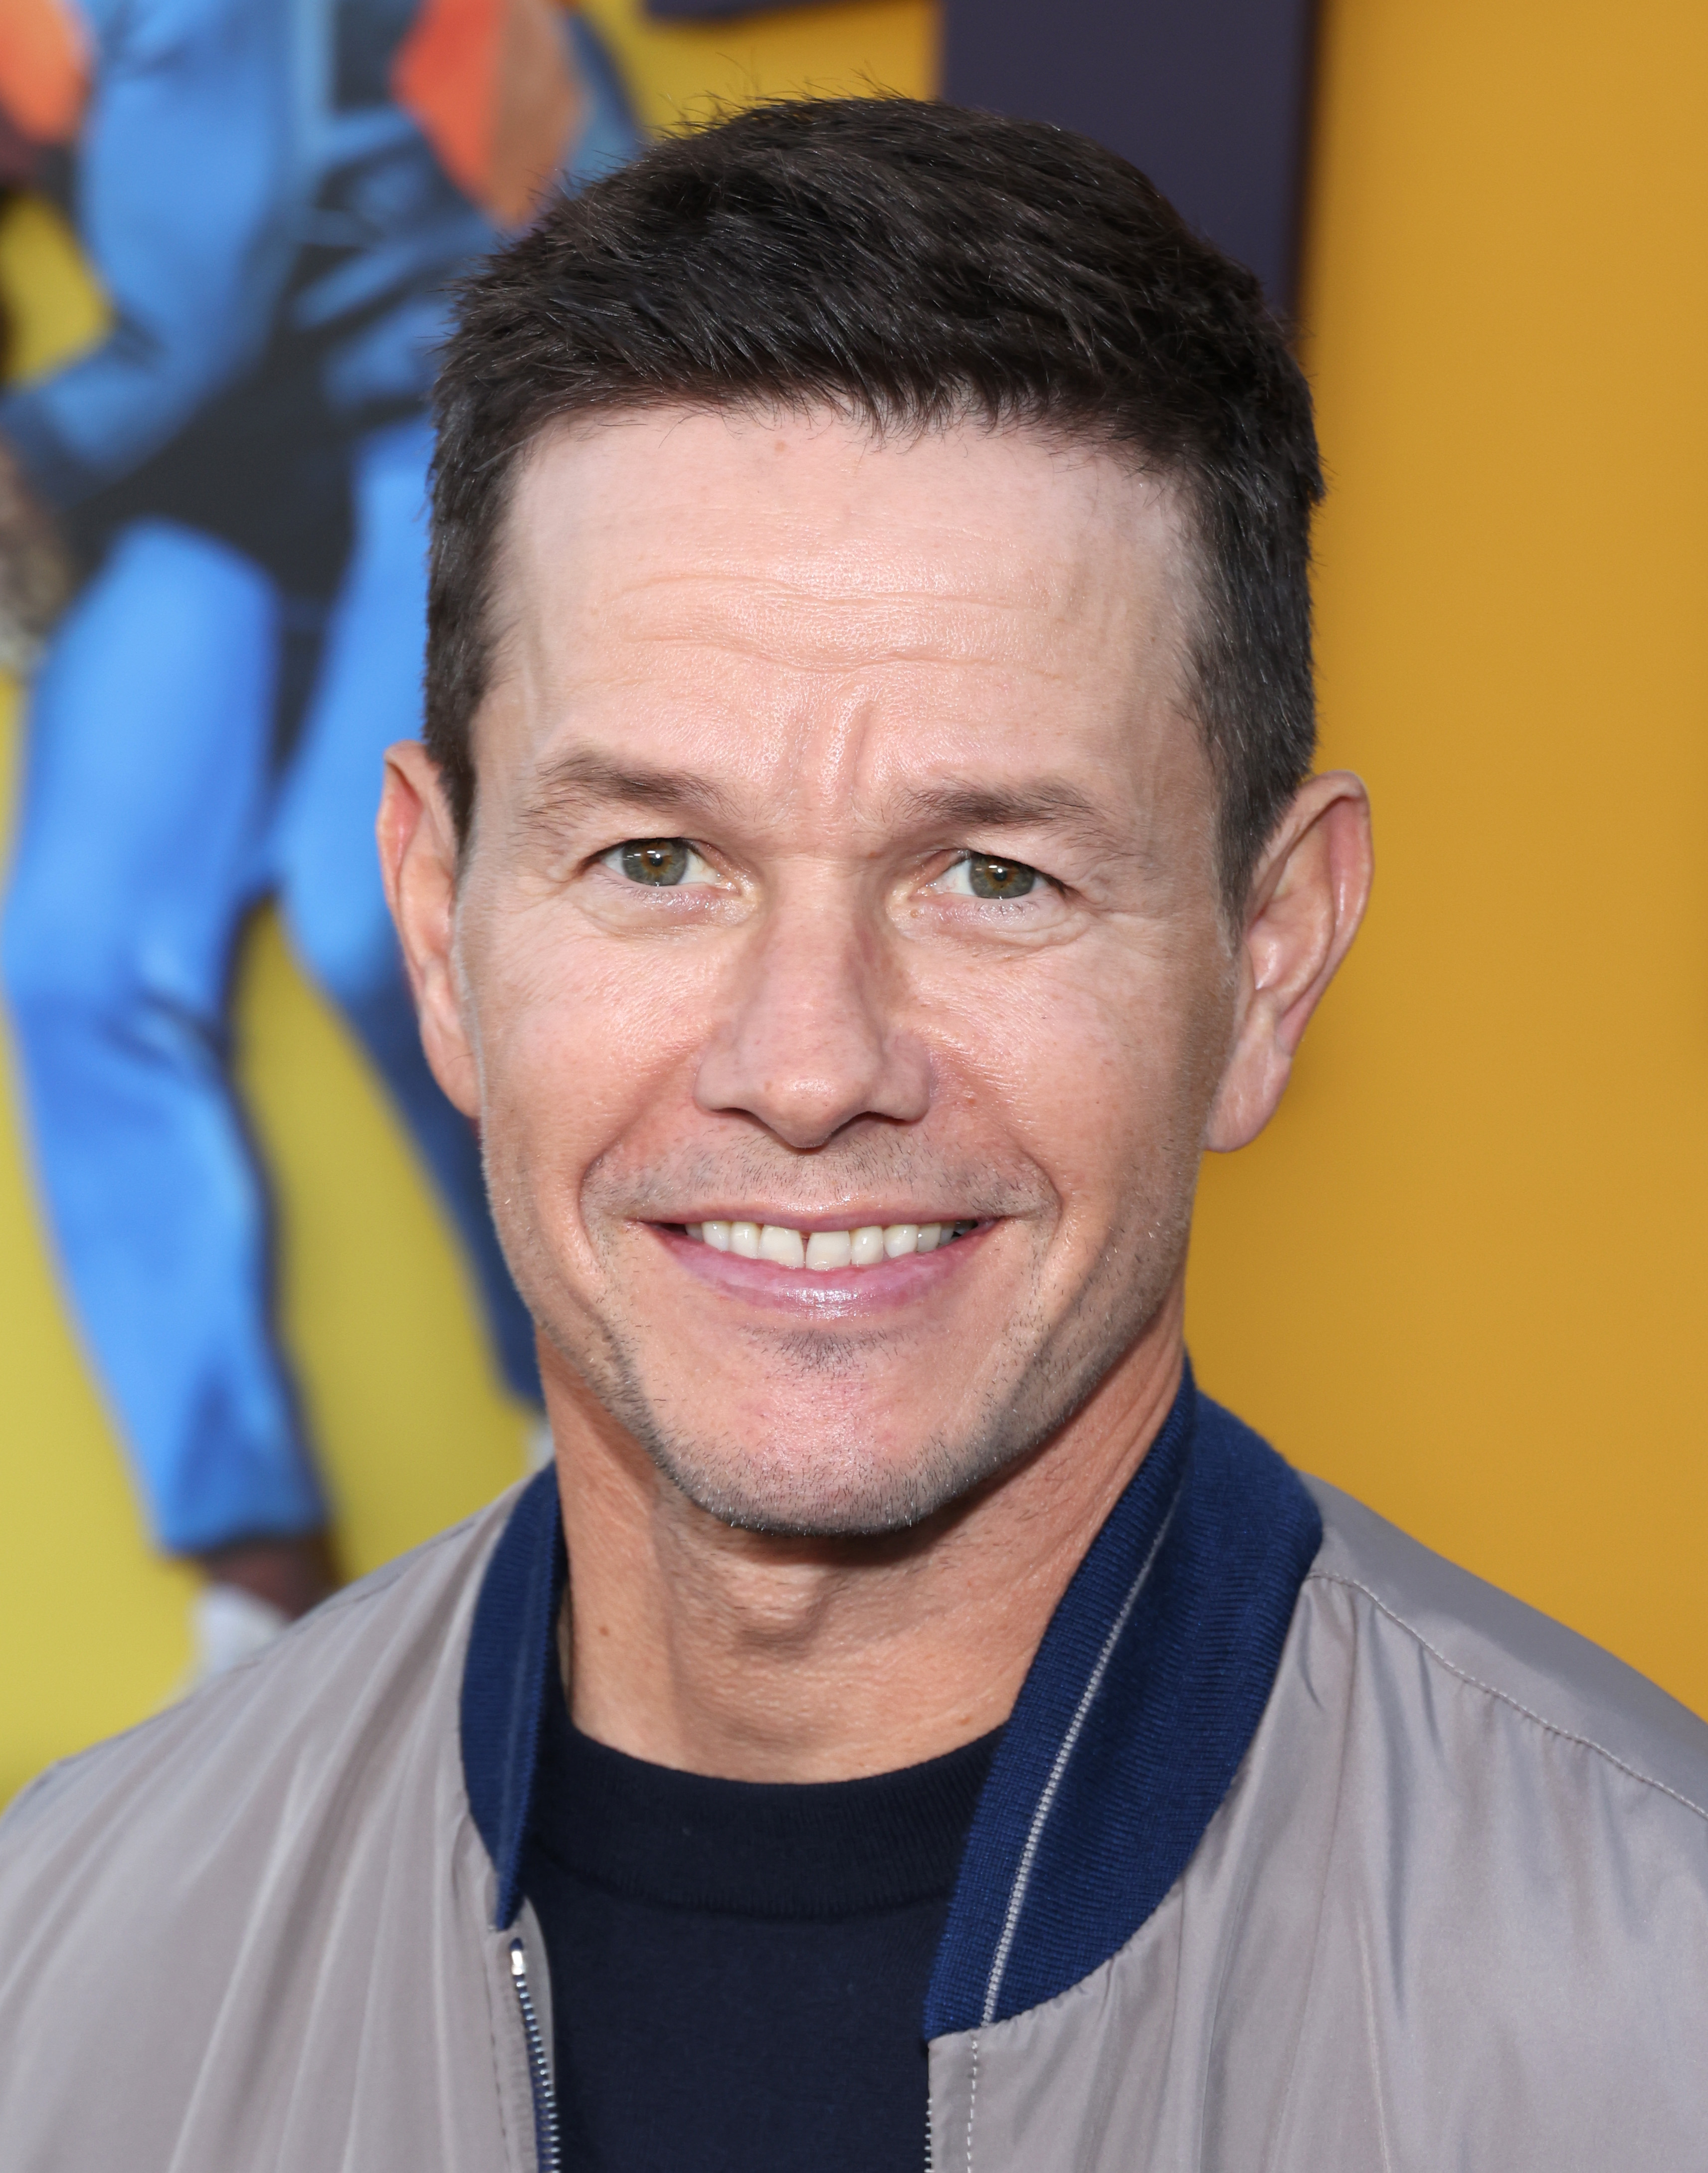 Mark Wahlberg attends the Los Angeles premiere of Netflix's "Me Time" at Regency Village Theatre on August 23, 2022 in Los Angeles, California. | Source: Getty Images